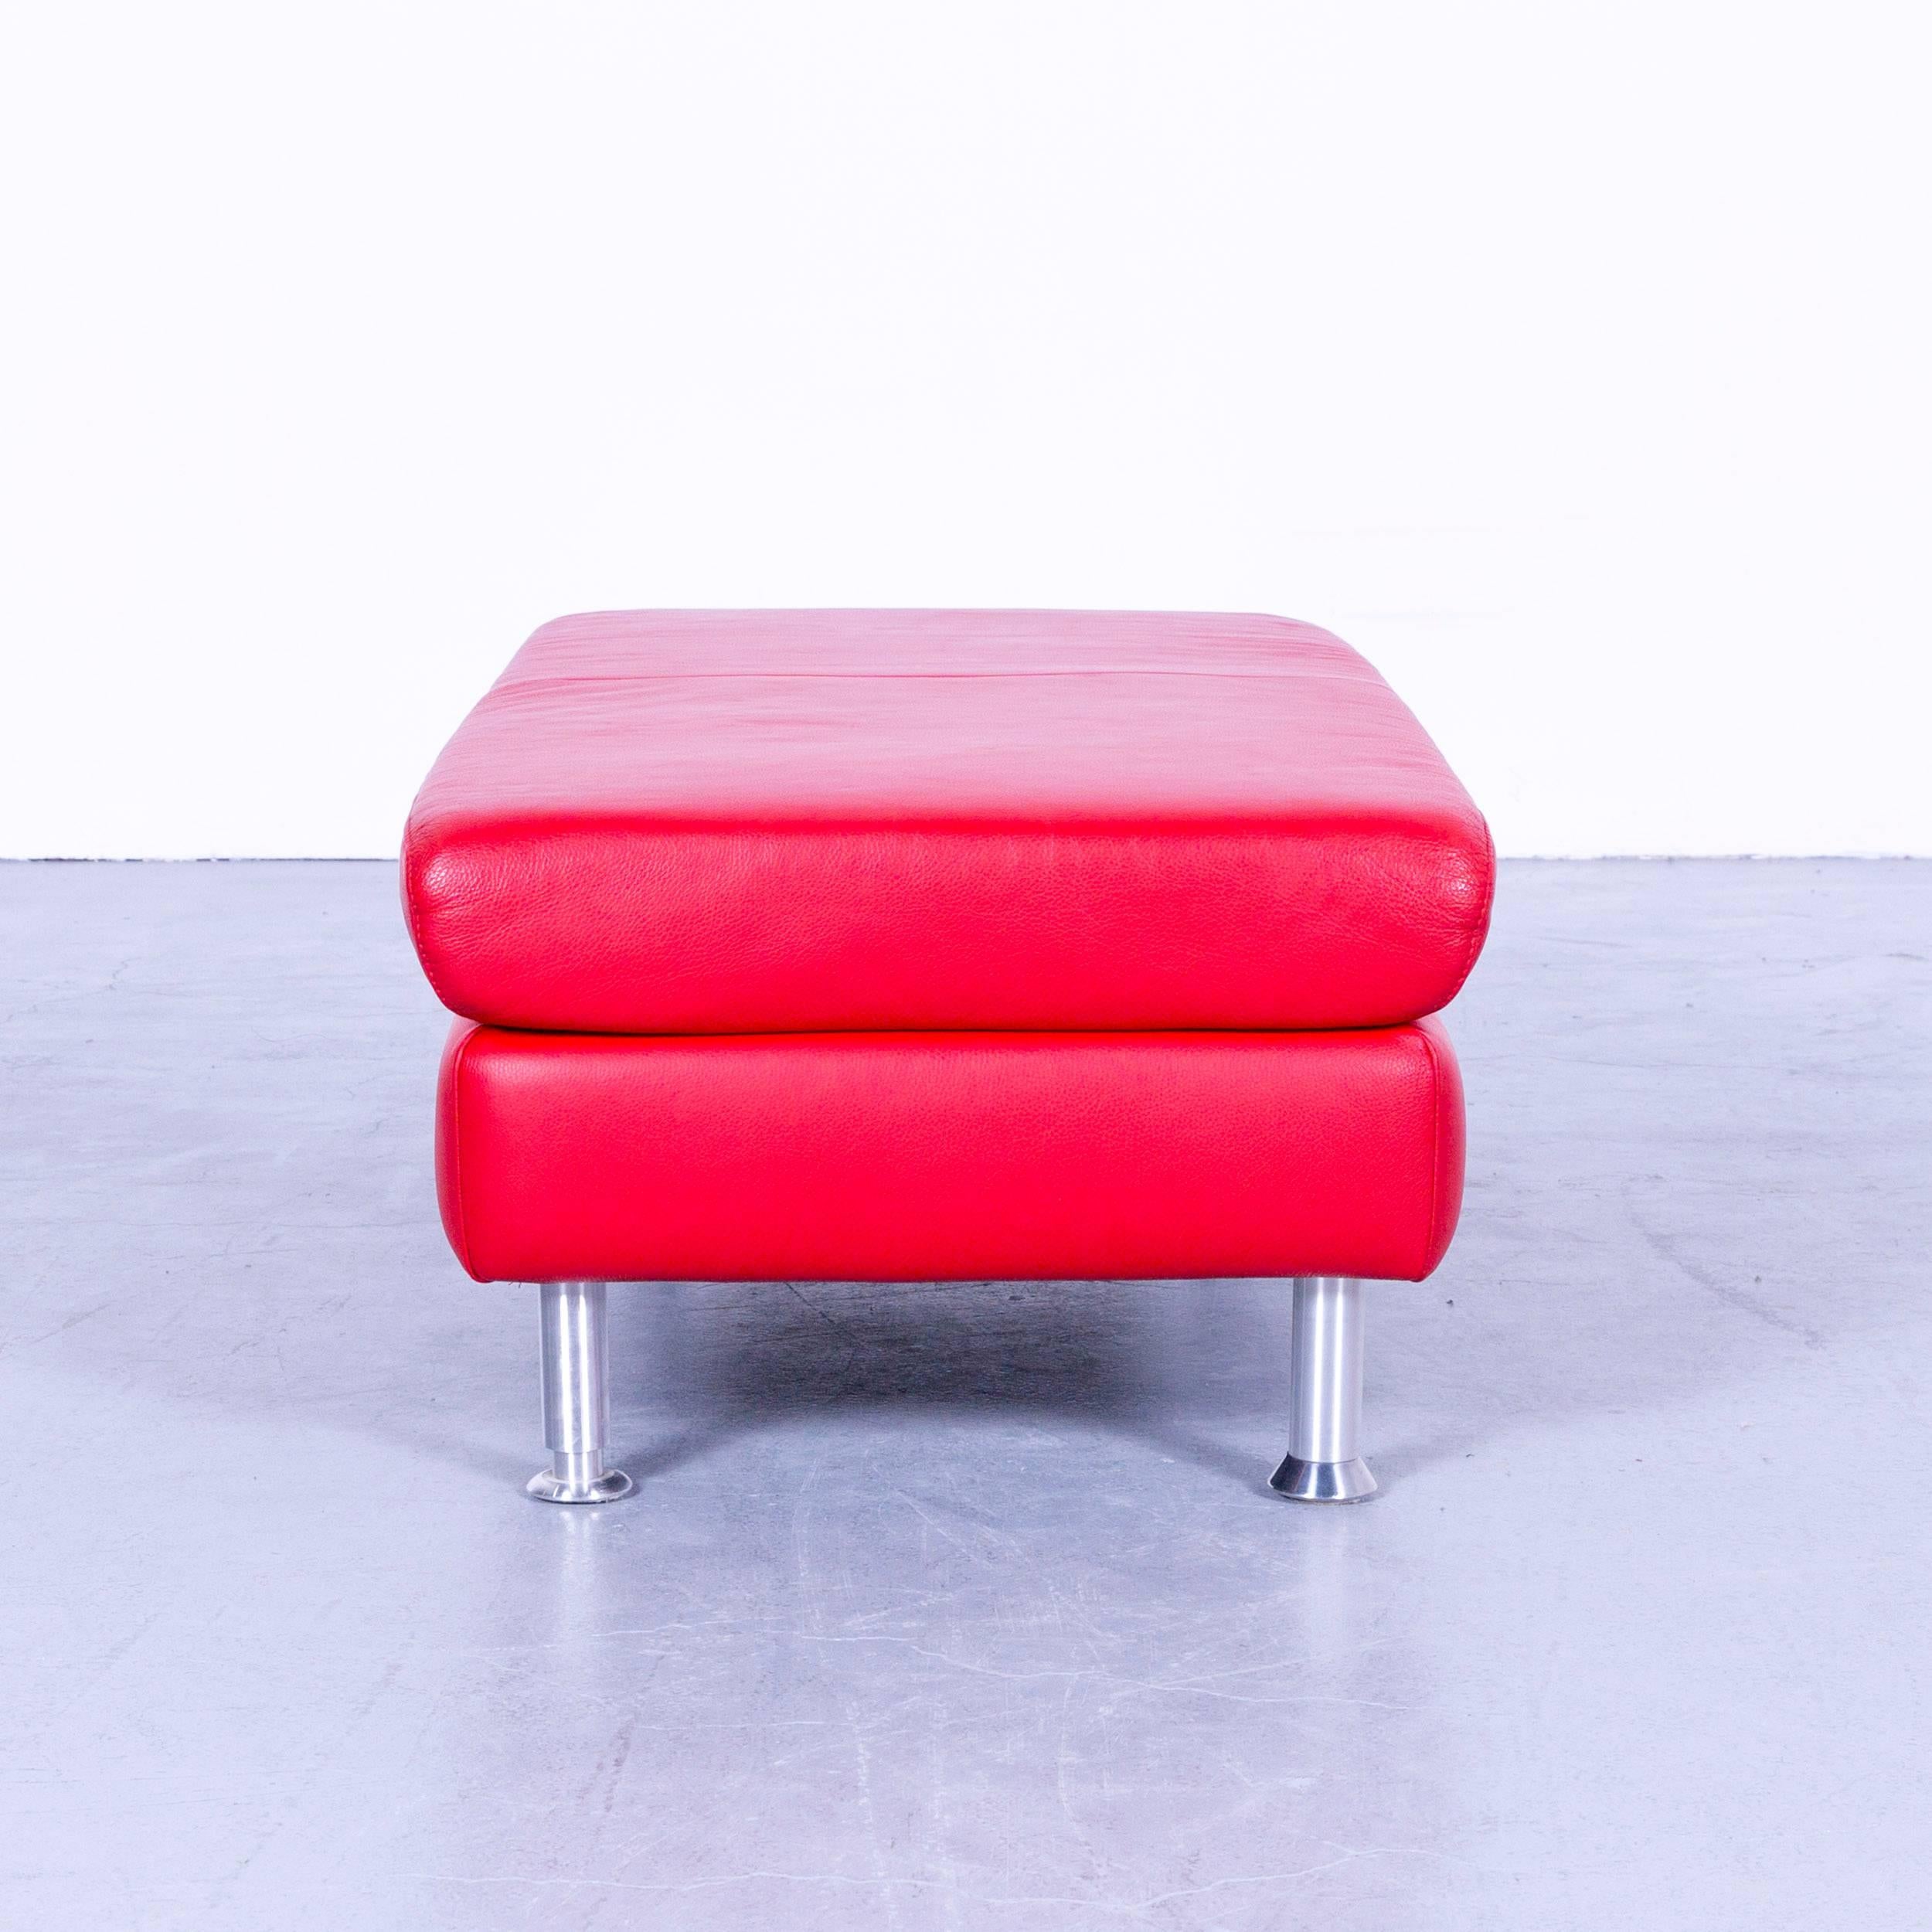 Willi Schillig Designer Leather Foot Stool Red Pouff Modern Couch In Good Condition For Sale In Cologne, DE